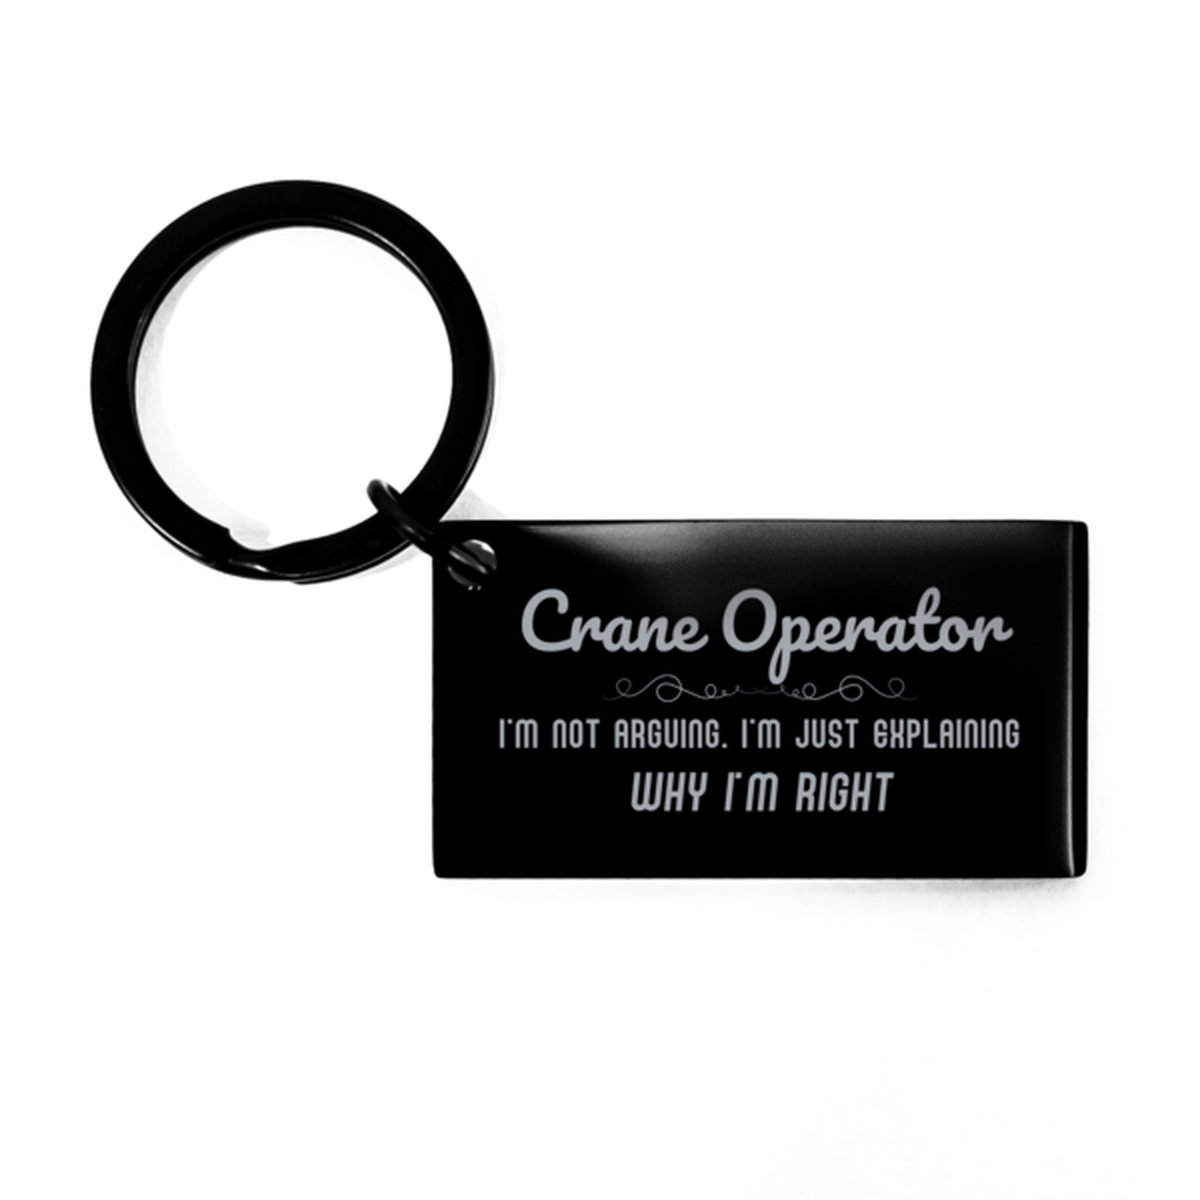 Crane Operator I'm not Arguing. I'm Just Explaining Why I'm RIGHT Keychain, Funny Saying Quote Crane Operator Gifts For Crane Operator Graduation Birthday Christmas Gifts for Men Women Coworker